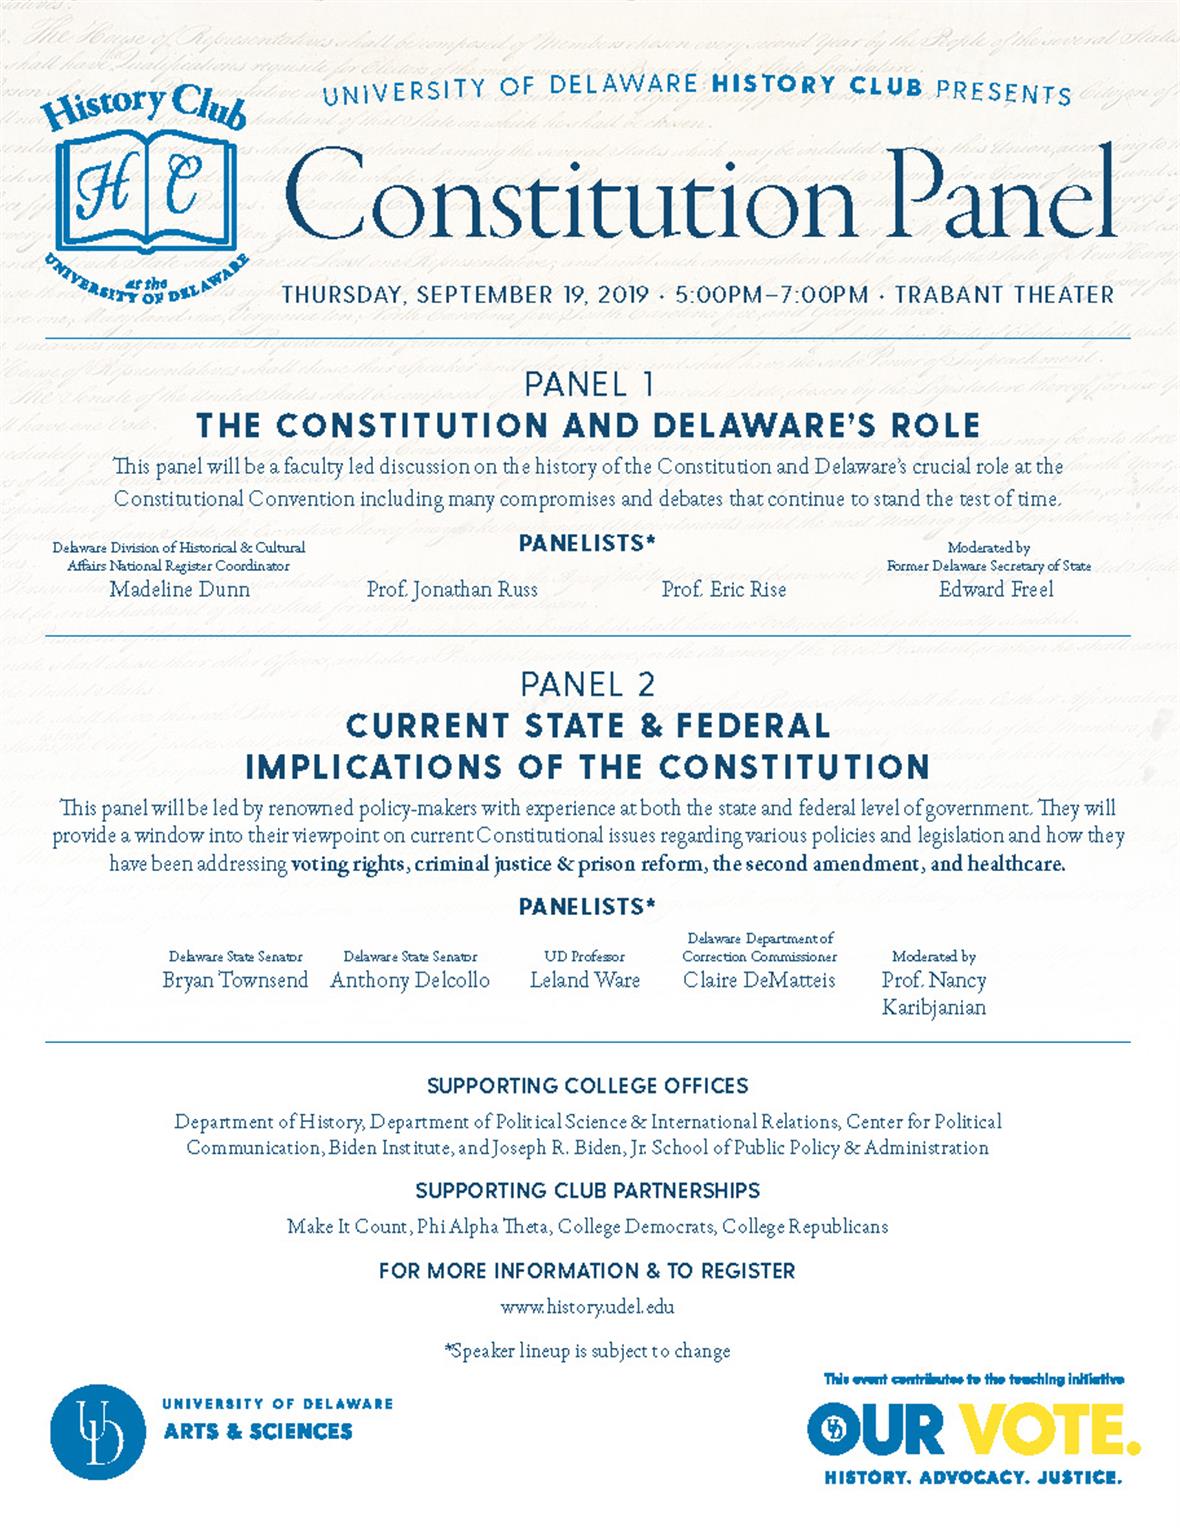 The History Club presents Constitution Panel Sept. 19, 5-7pm in Trabant University Theater